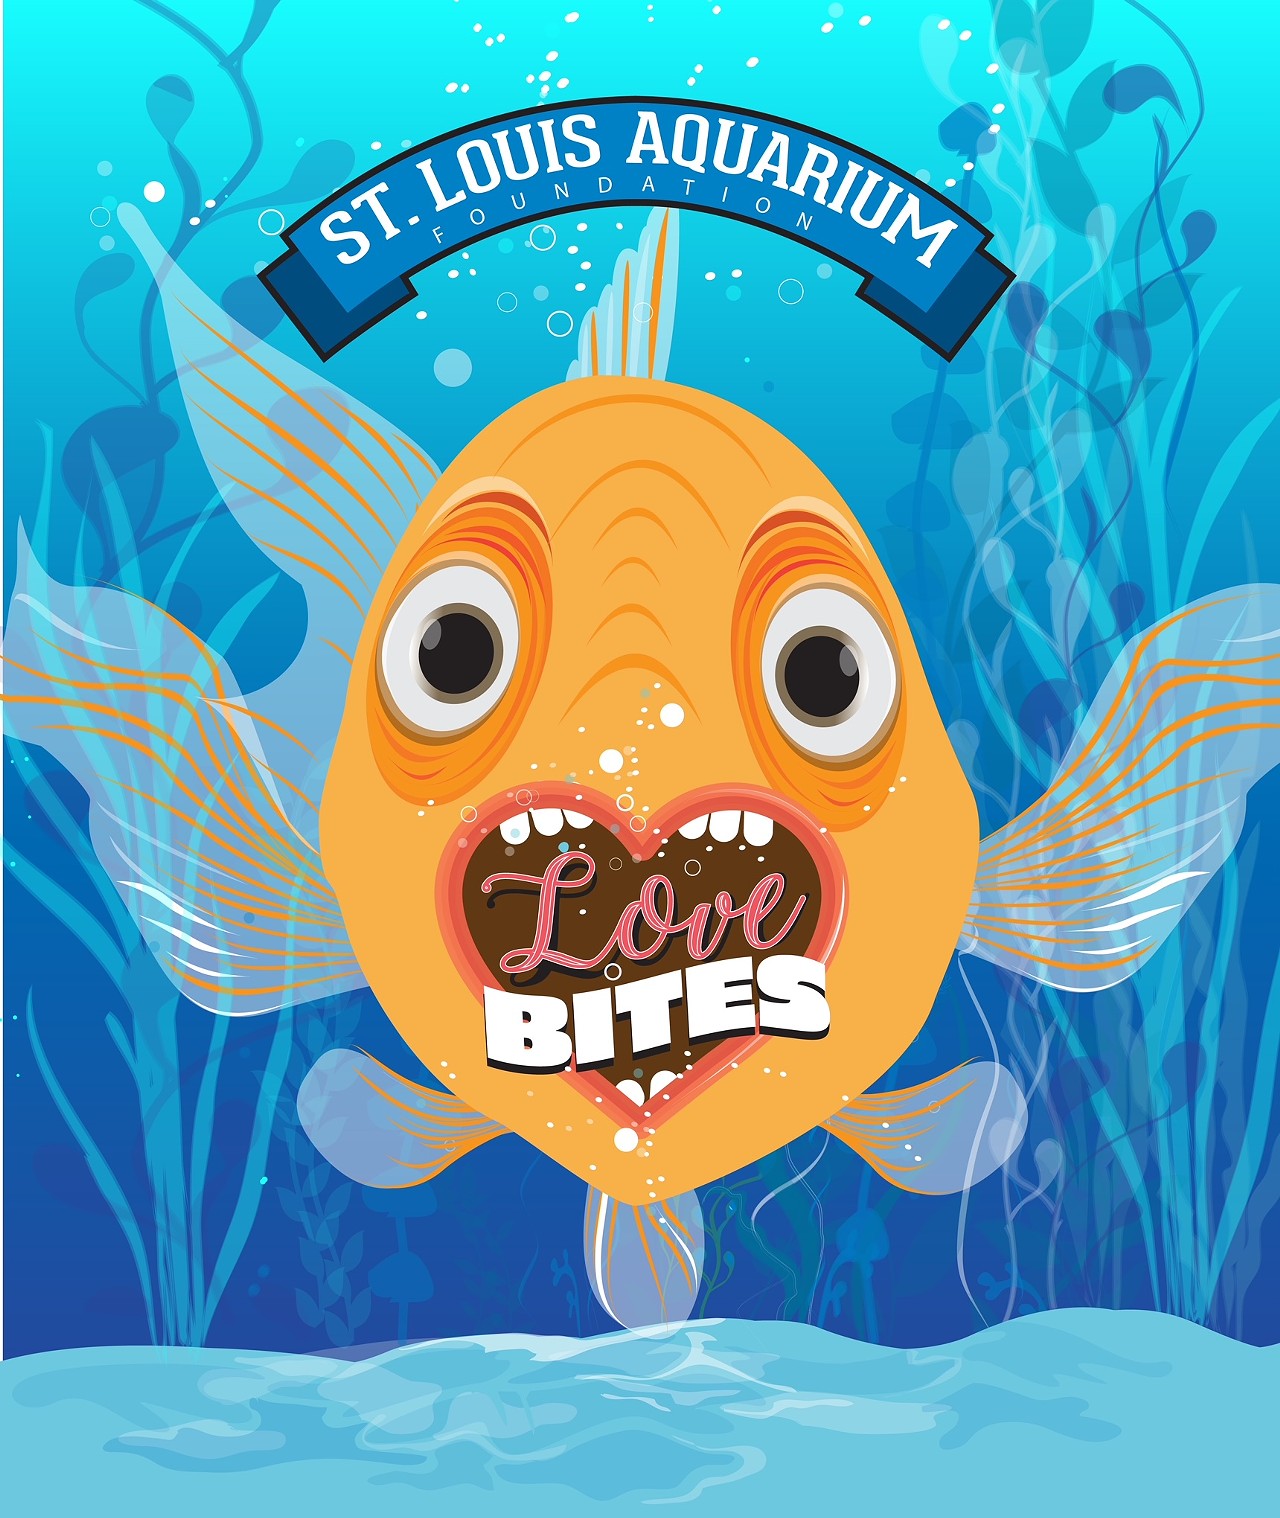 St. Louis Aquarium&rsquo;s Love Bites
Looking for some harmless revenge? Now until Valentine&rsquo;s Day at noon the St. Louis Aquarium (201 South 18th Street) is allowing guests to symbolically name a mealworm, cricket or veggie after your not-so-special someone and have it fed to one of the animals at the aquarium. Along with your $5, $10 or $25 donation, guests will receive a digital Valentine&rsquo;s Day card showing their support for the Love Bites Fundraiser. (You must be 18 years or older to take revenge.) 